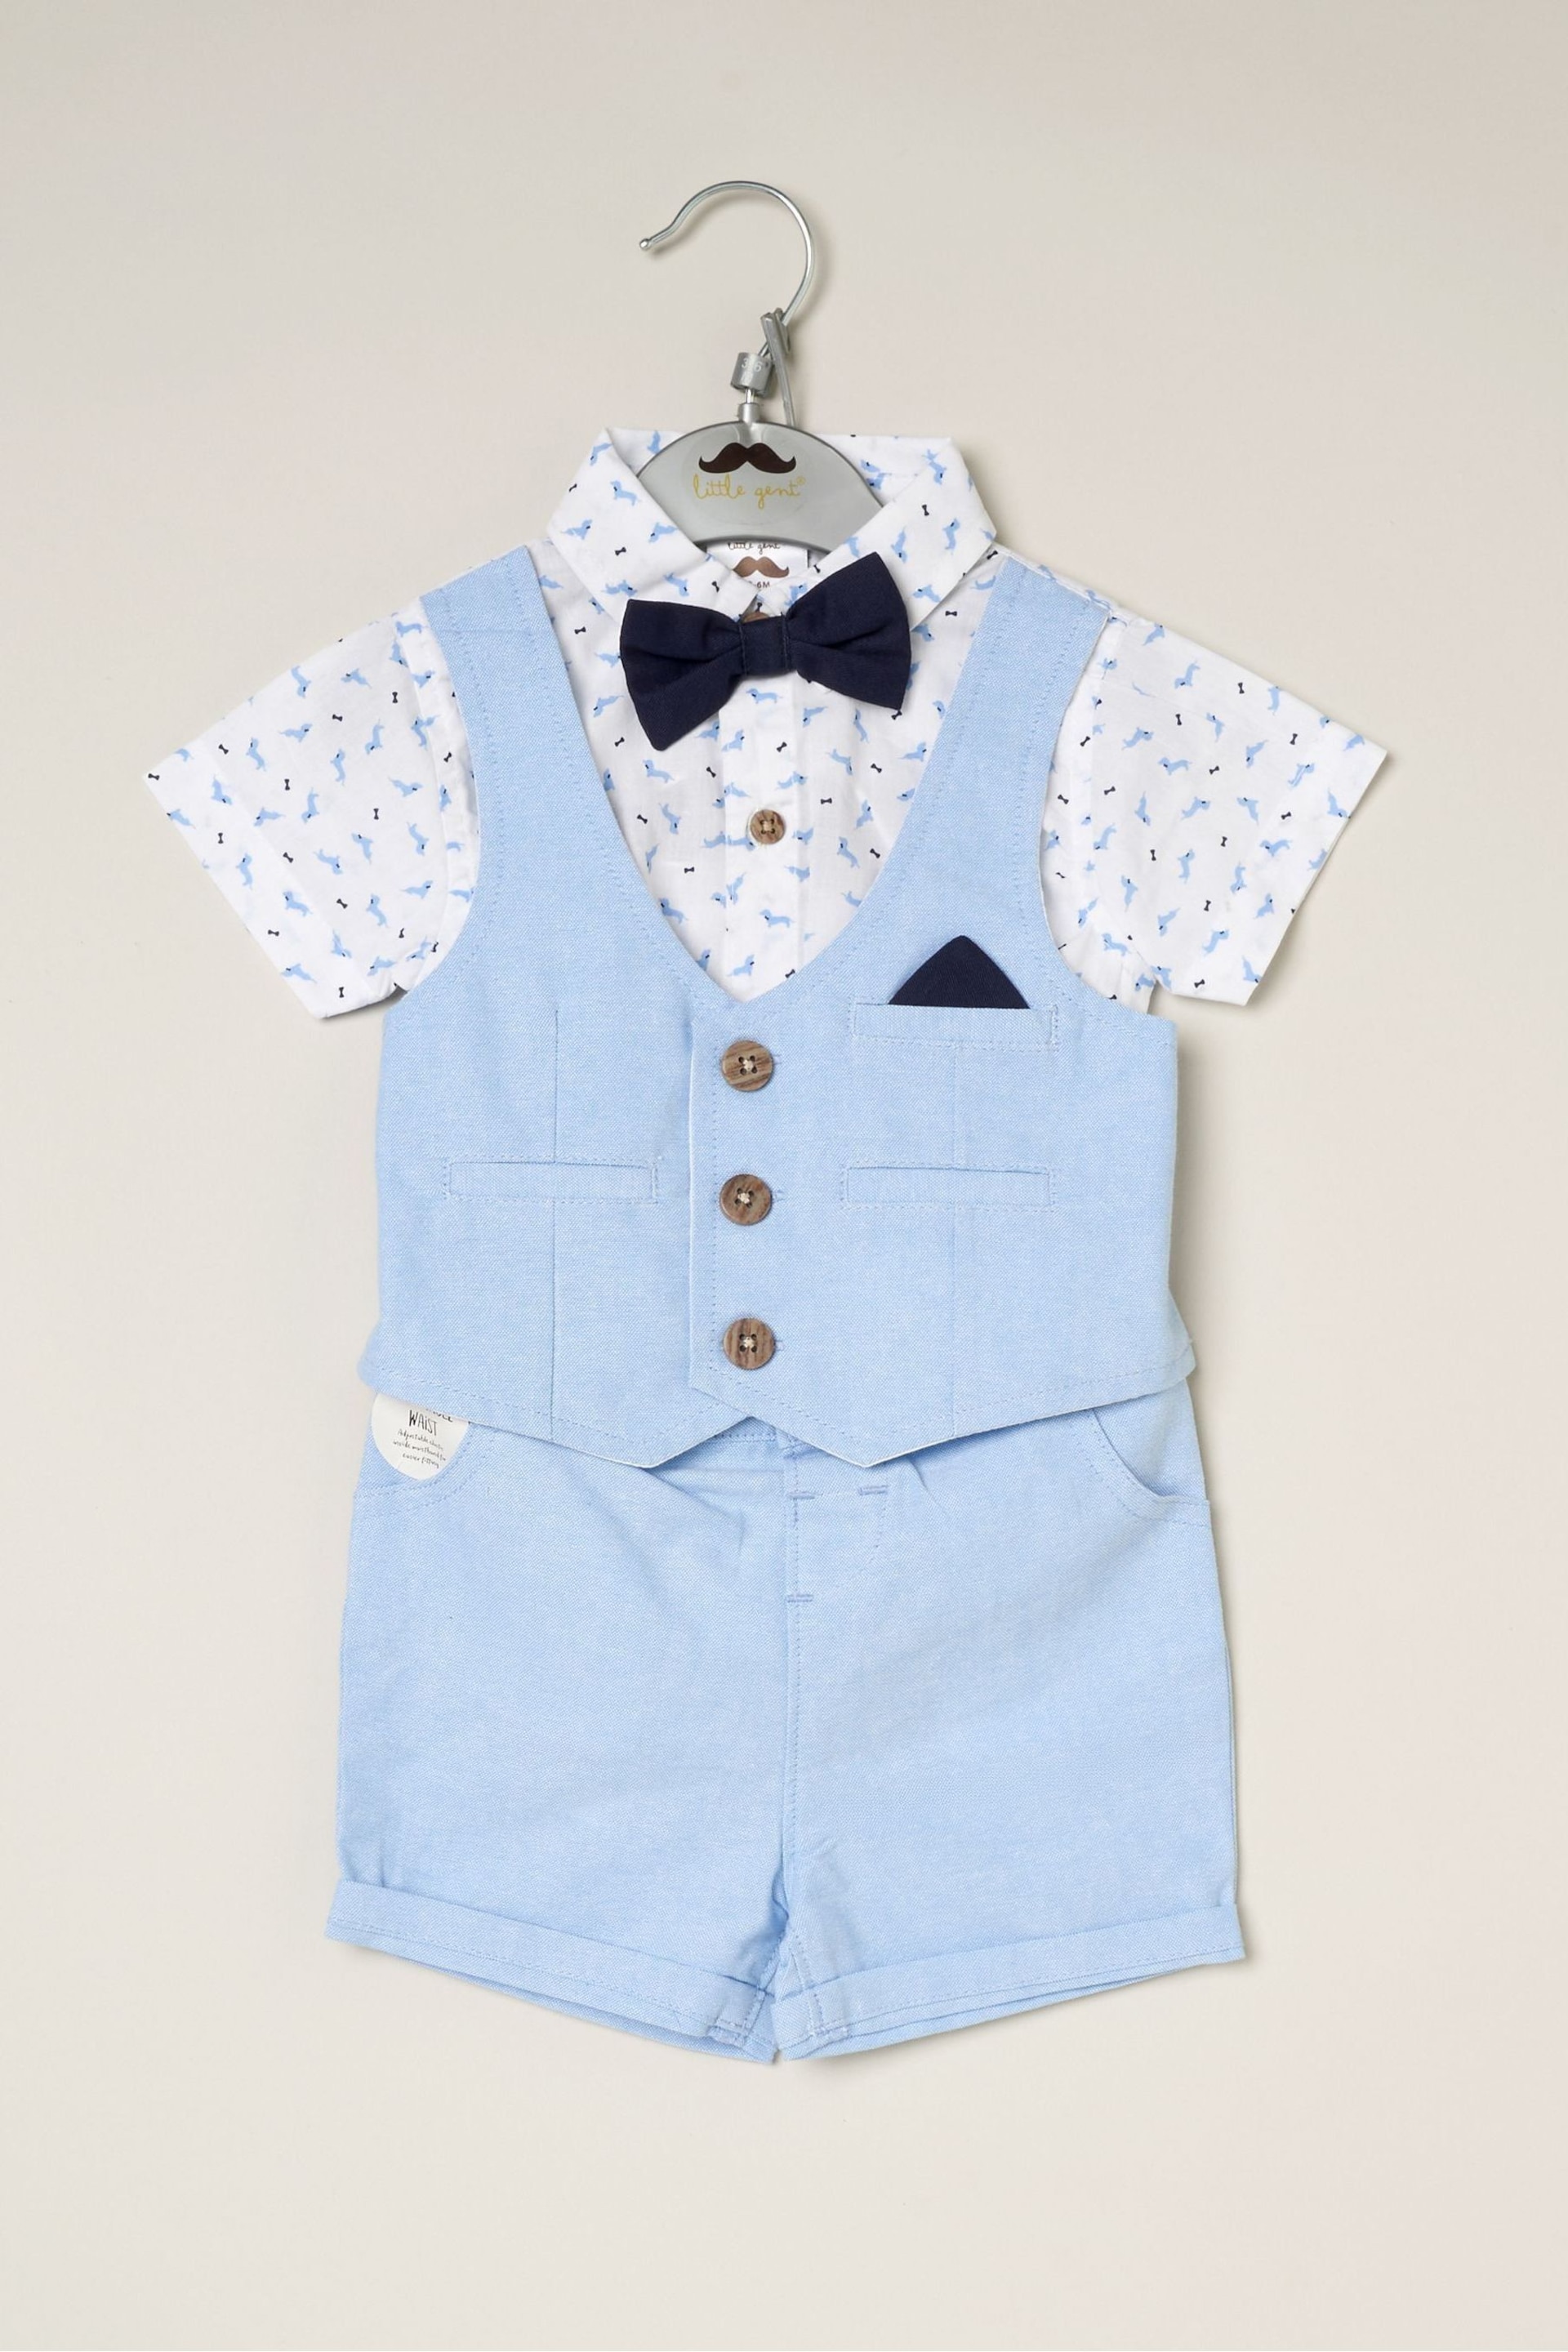 Little Gent Blue Shirt Style Bodysuit Shorts And Bowtie Outfit Set - Image 2 of 4